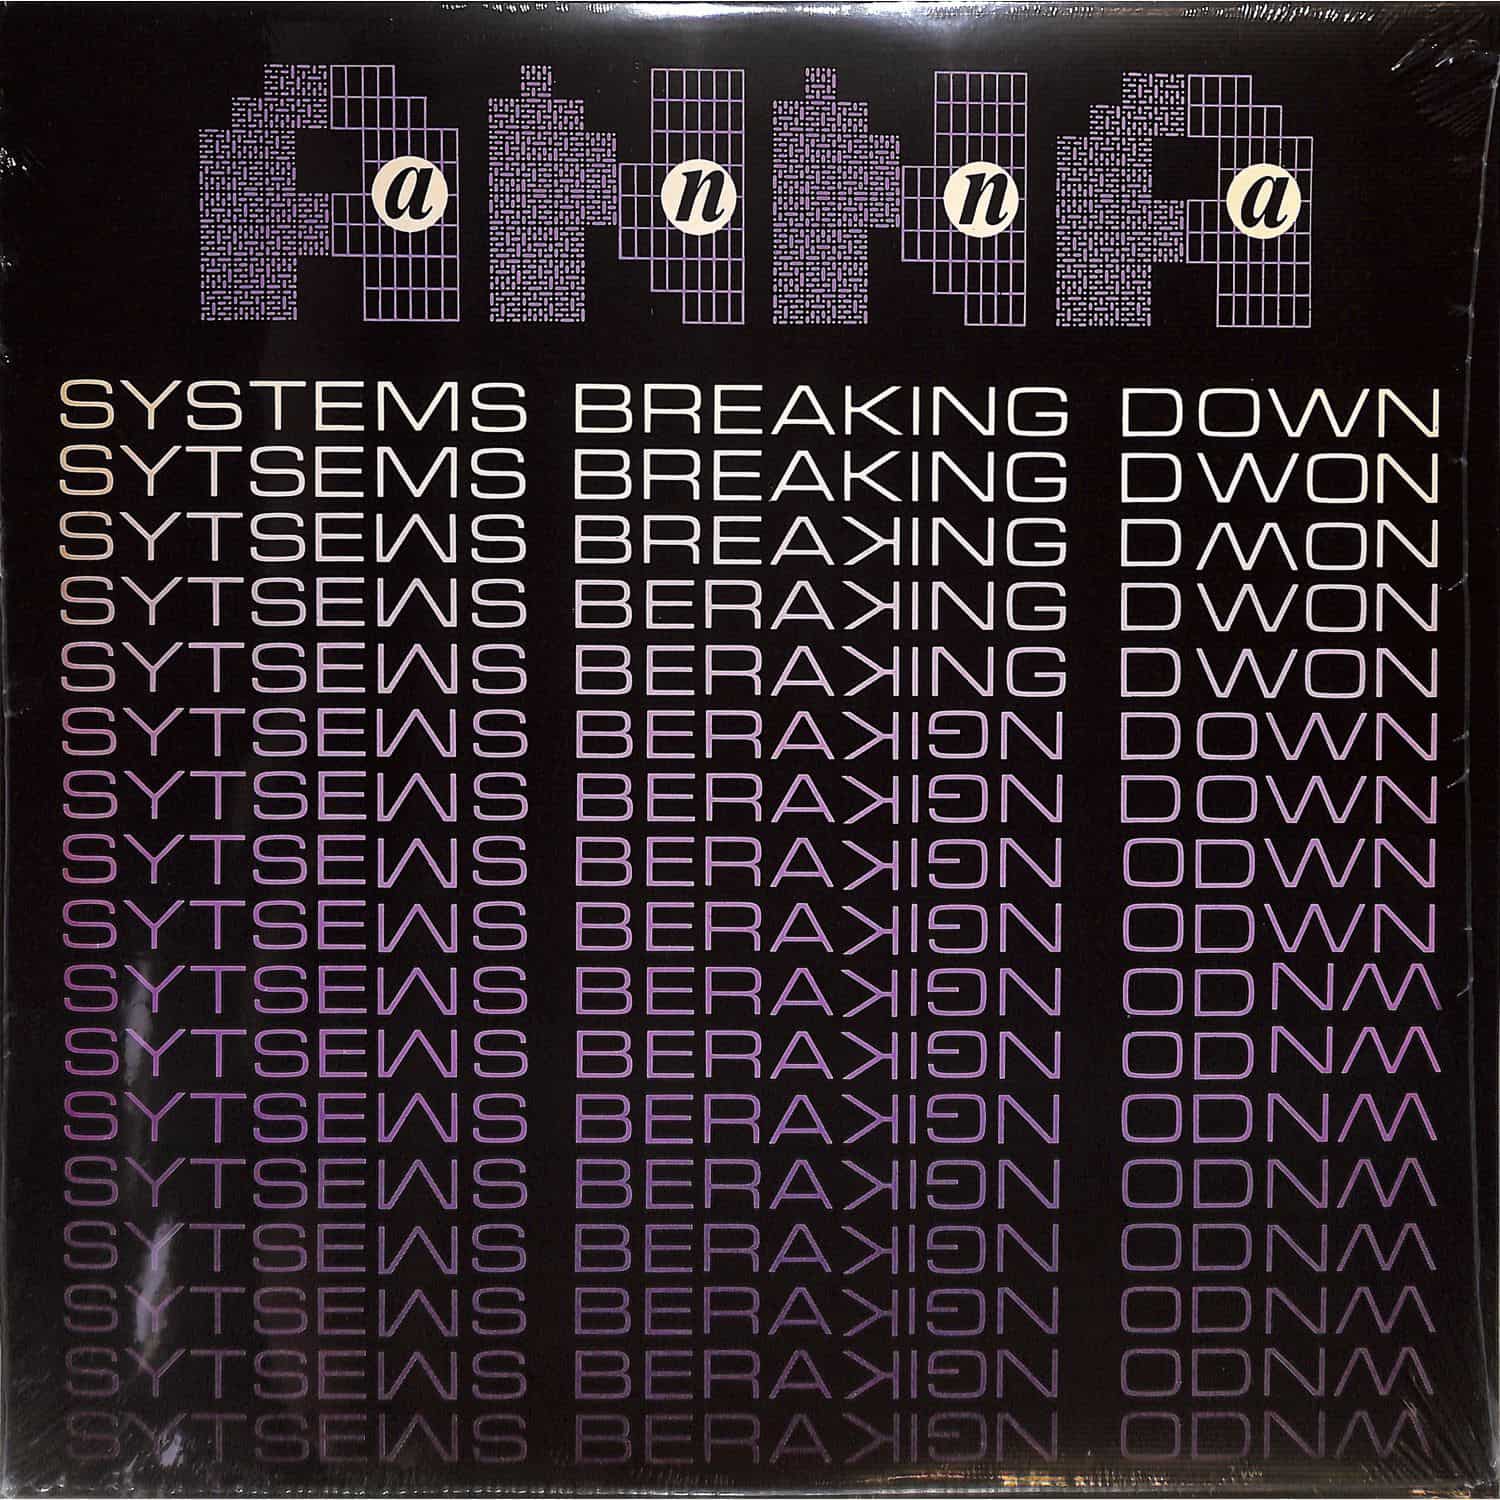 Anna - SYSTEMS BREAKING DOWN 